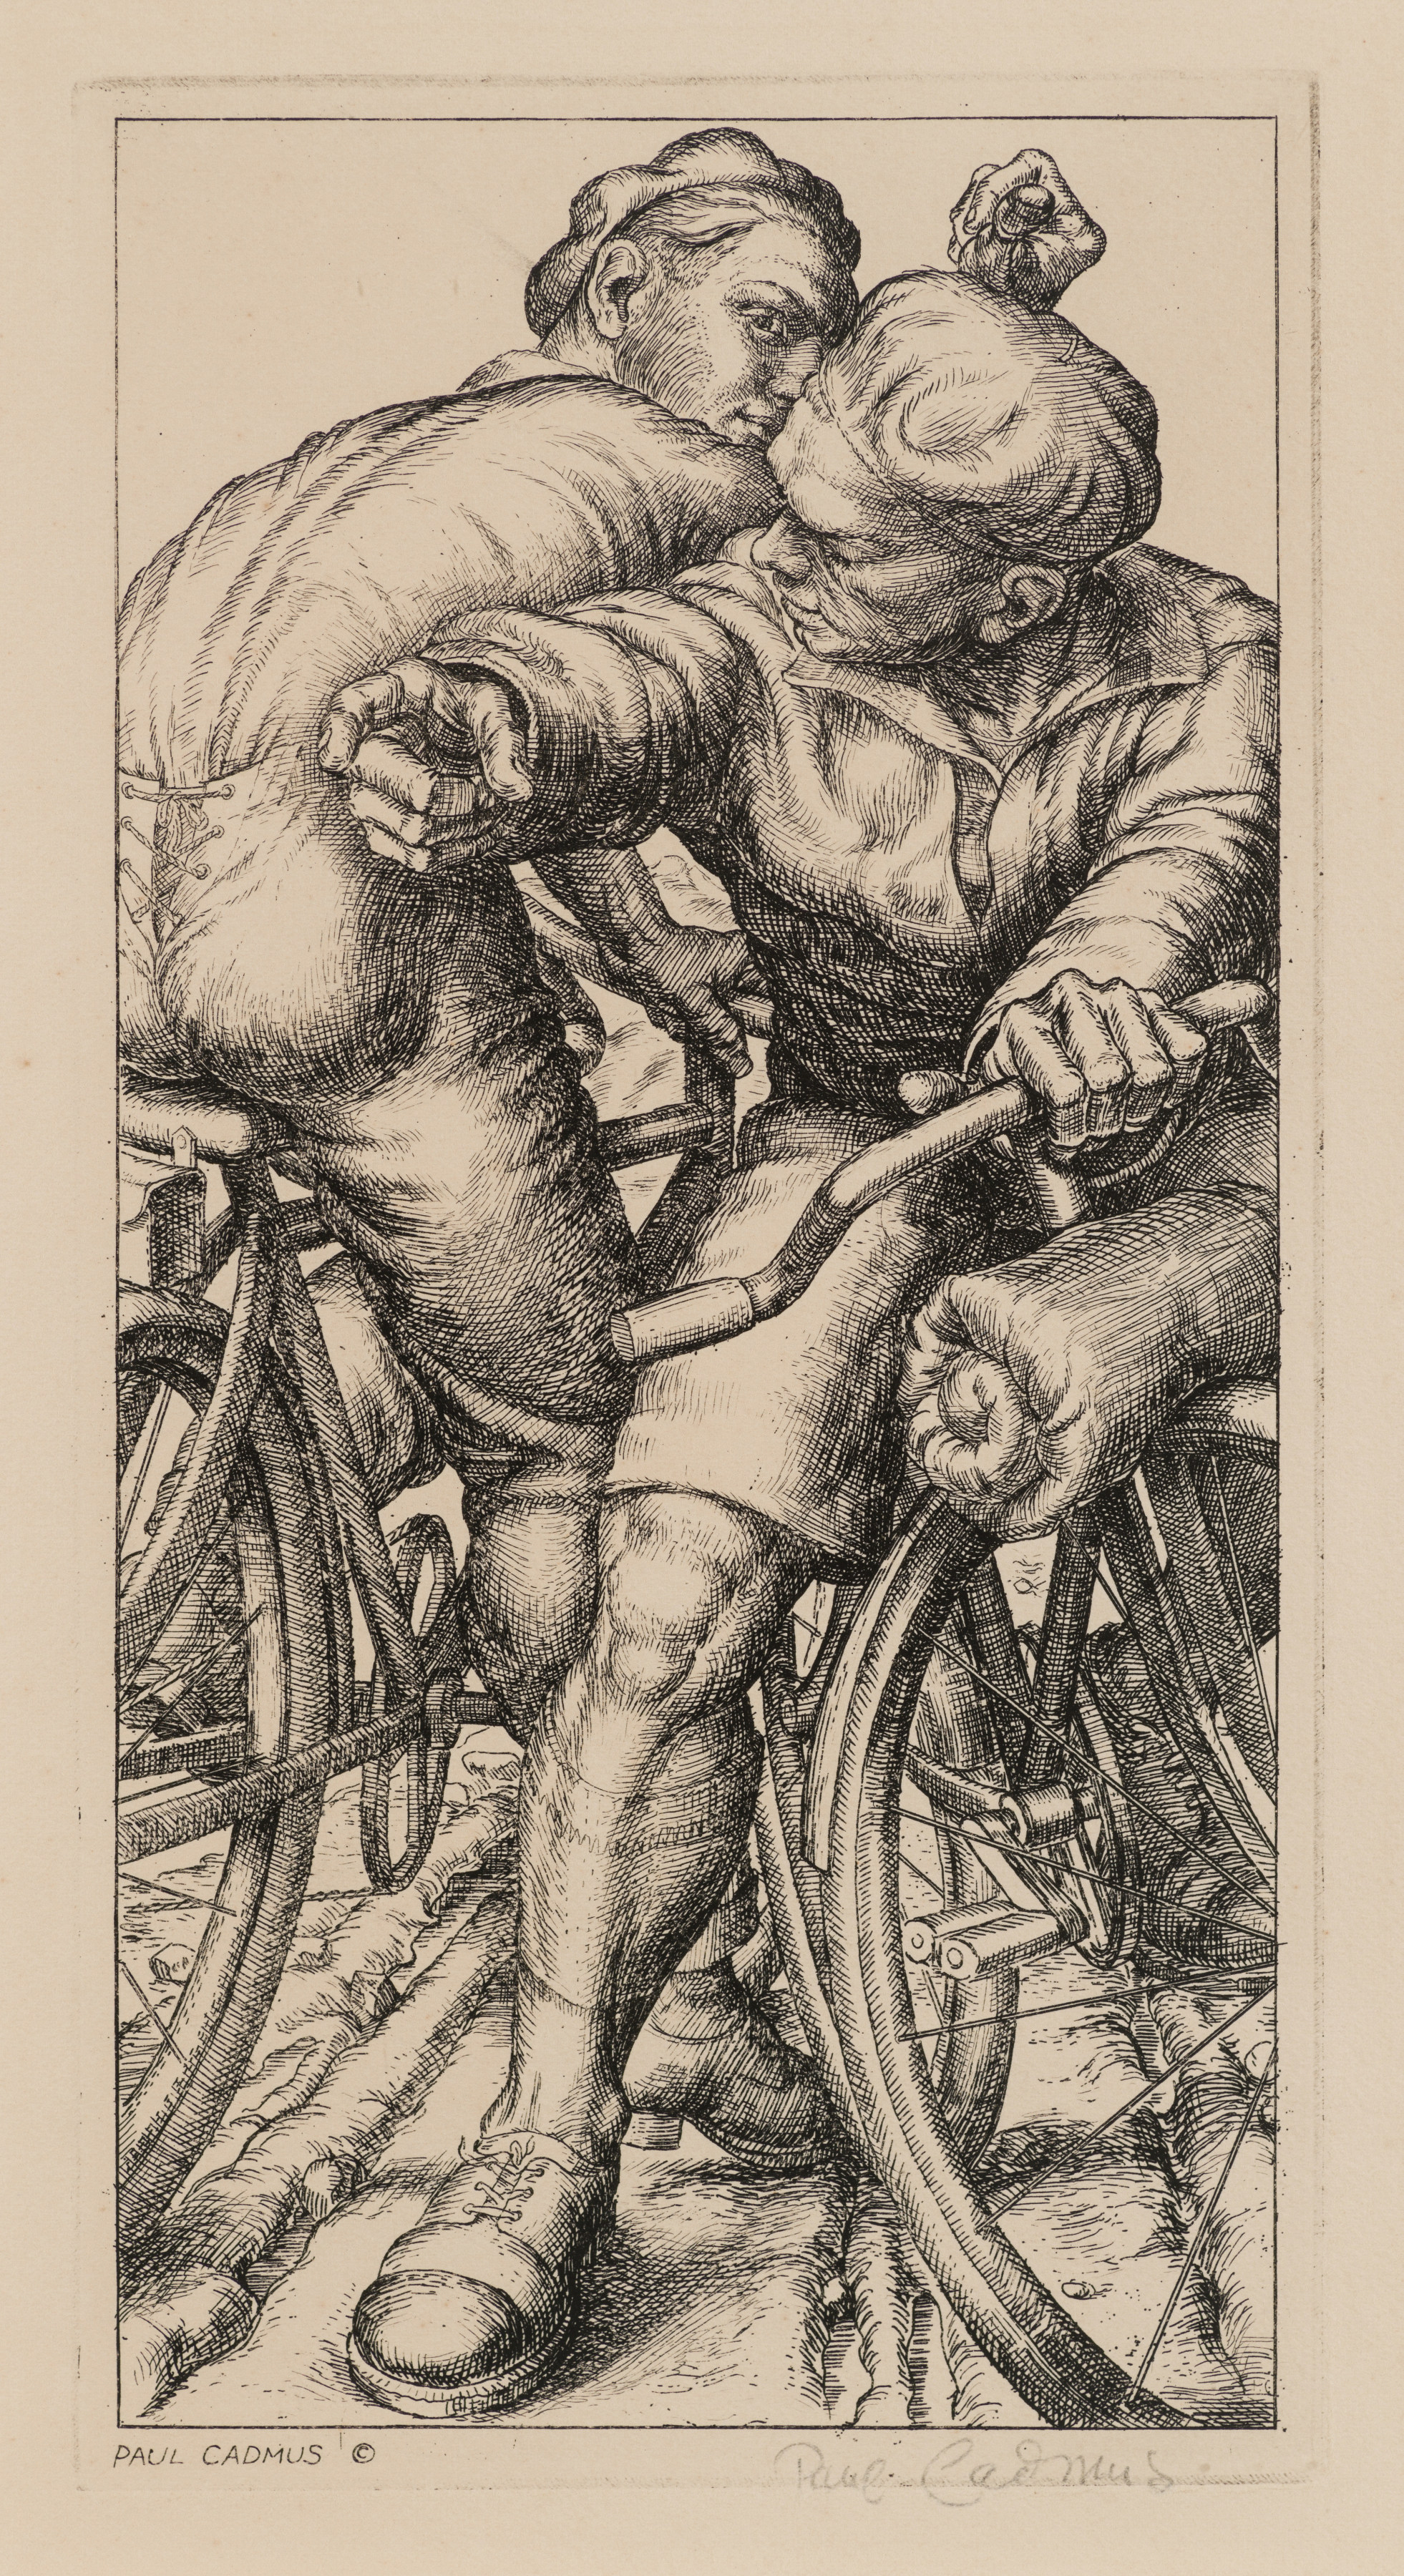 Going South, 1935, Etching, 10 1/4 x 5 1/2 inches